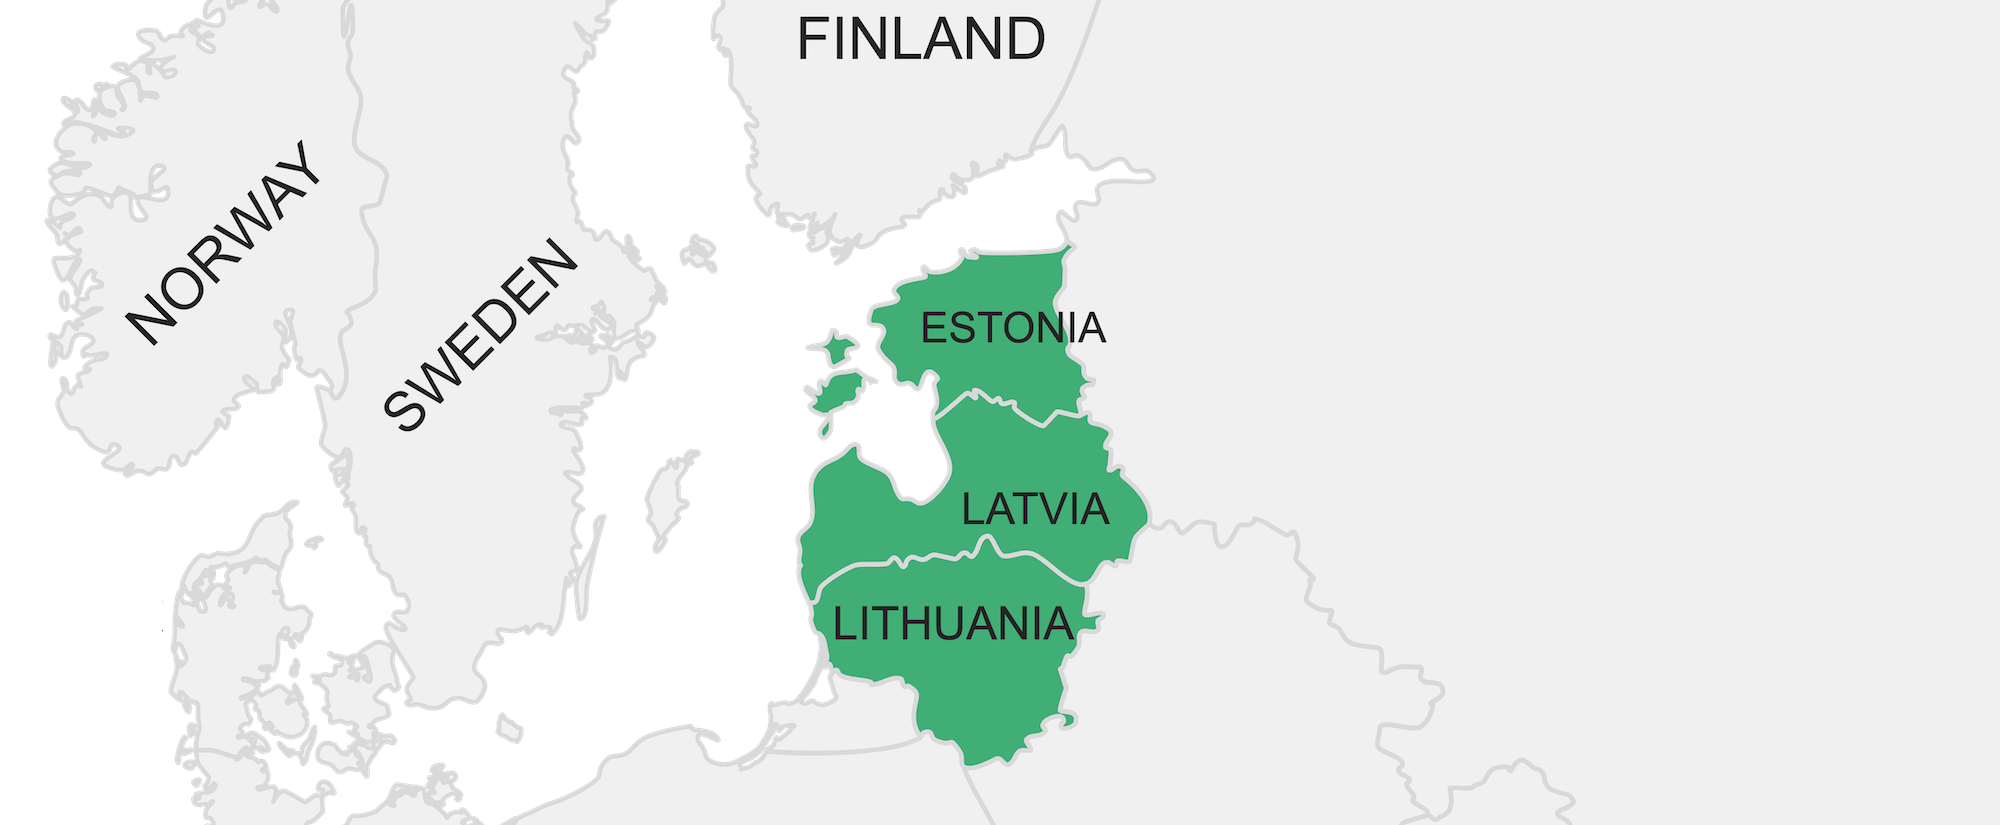 Country-guessing the Baltics